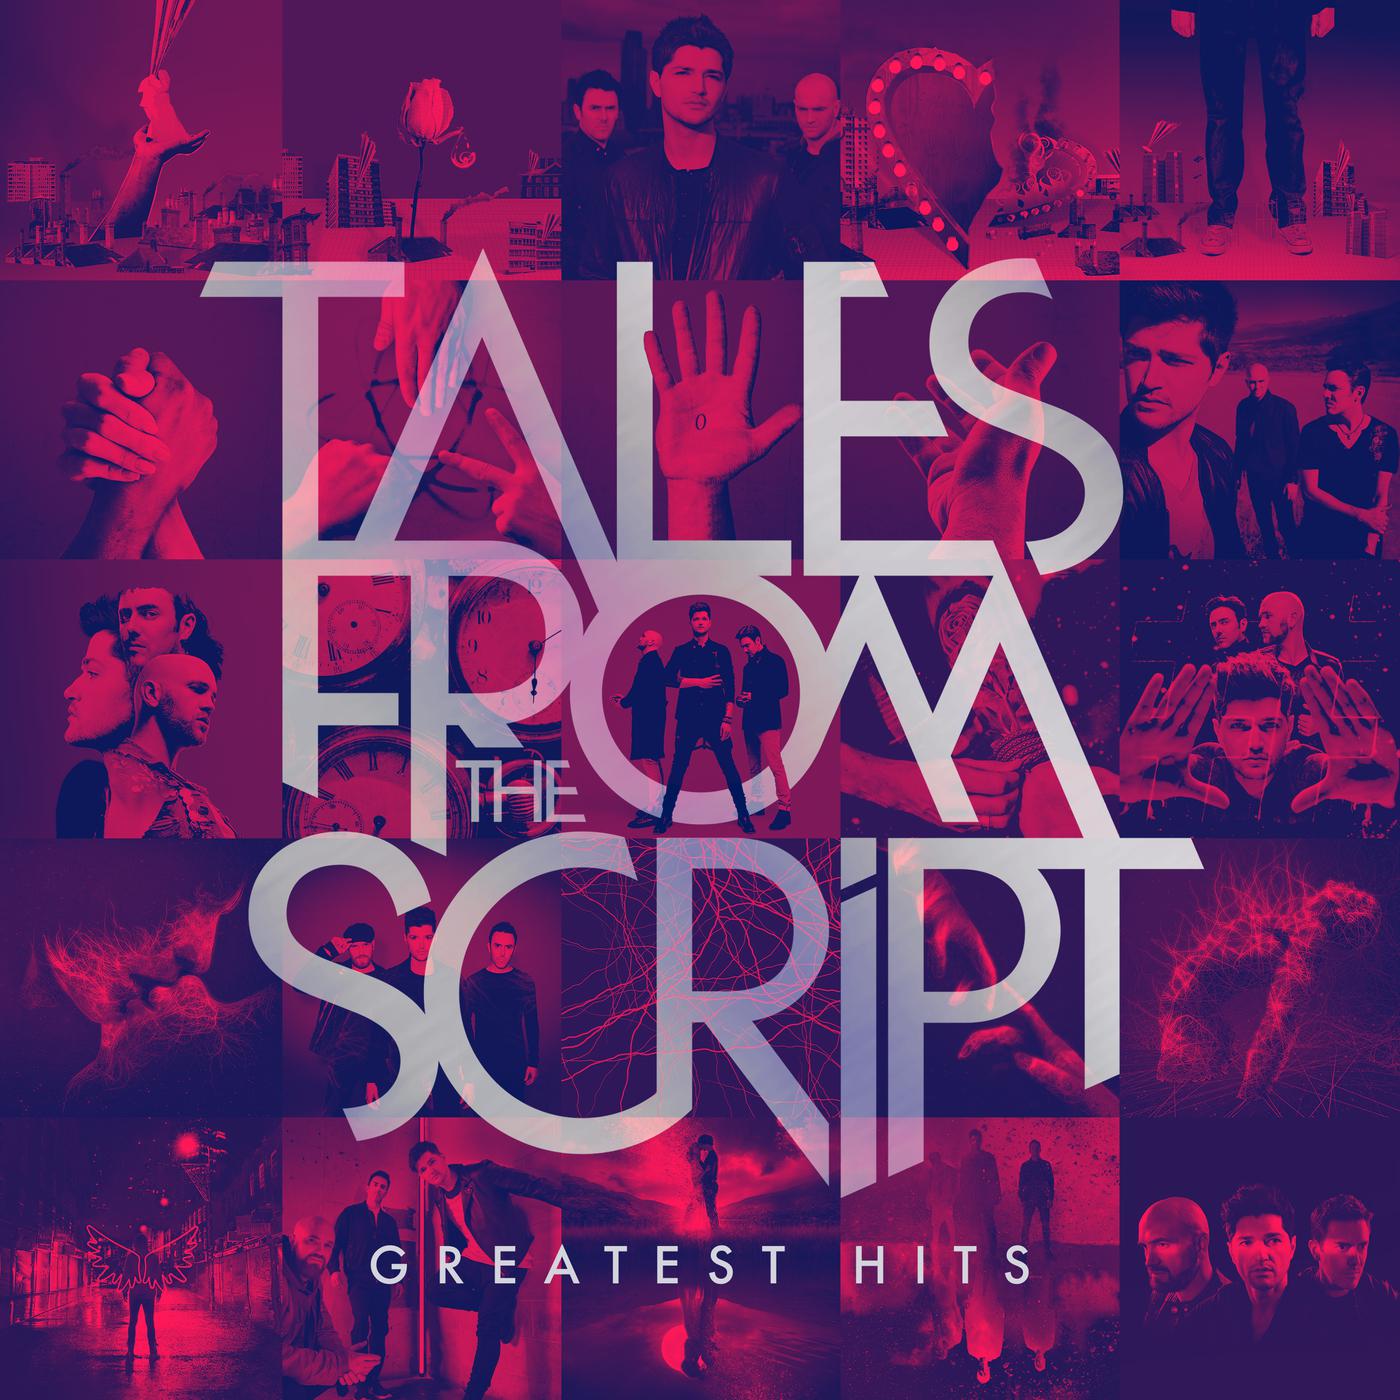 We Cry歌词 歌手The Script-专辑Tales from The Script: Greatest Hits-单曲《We Cry》LRC歌词下载